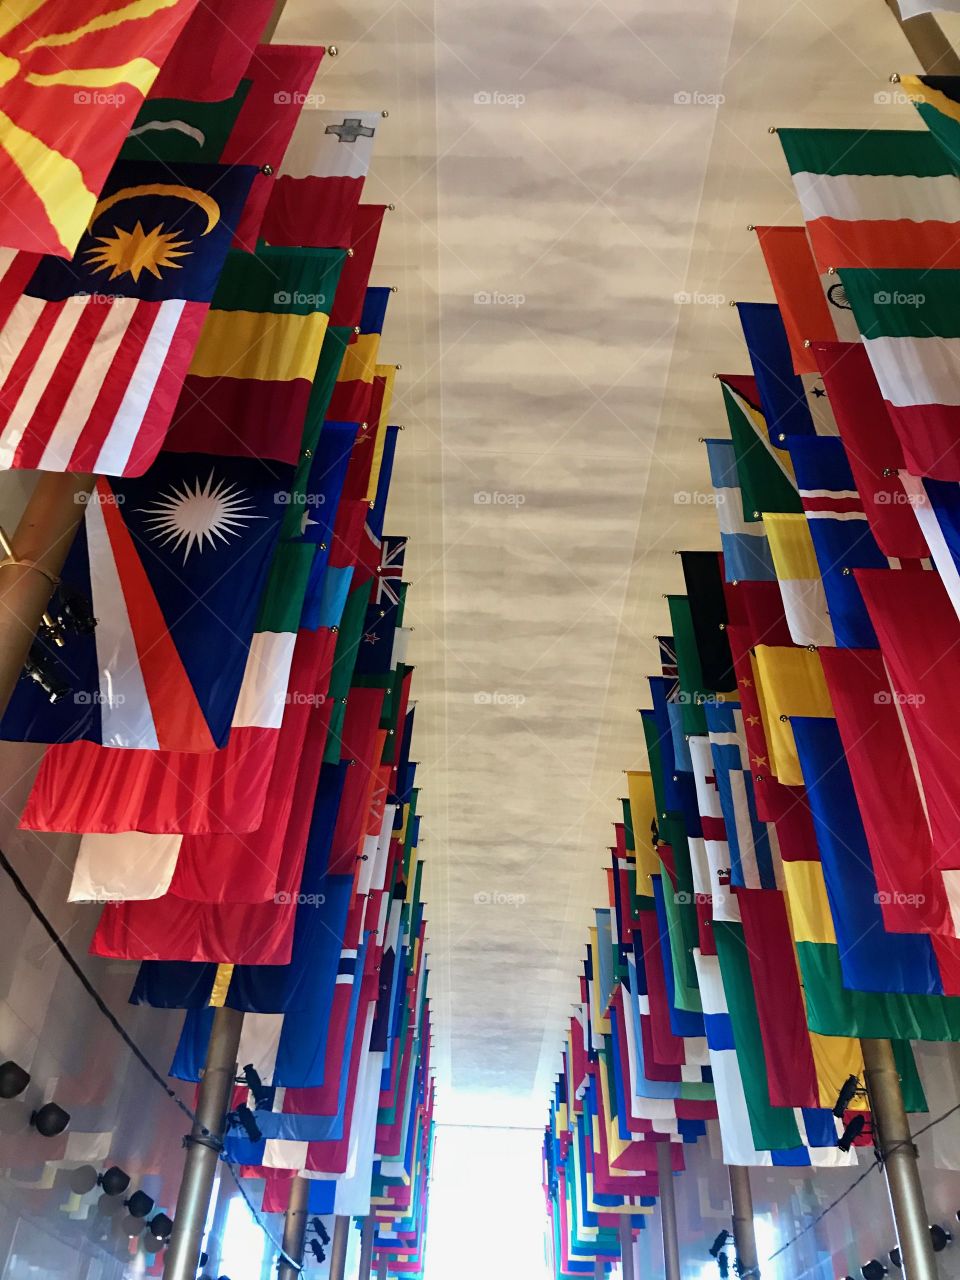 Hall of nations - Kennedy Center for The Performing Arts